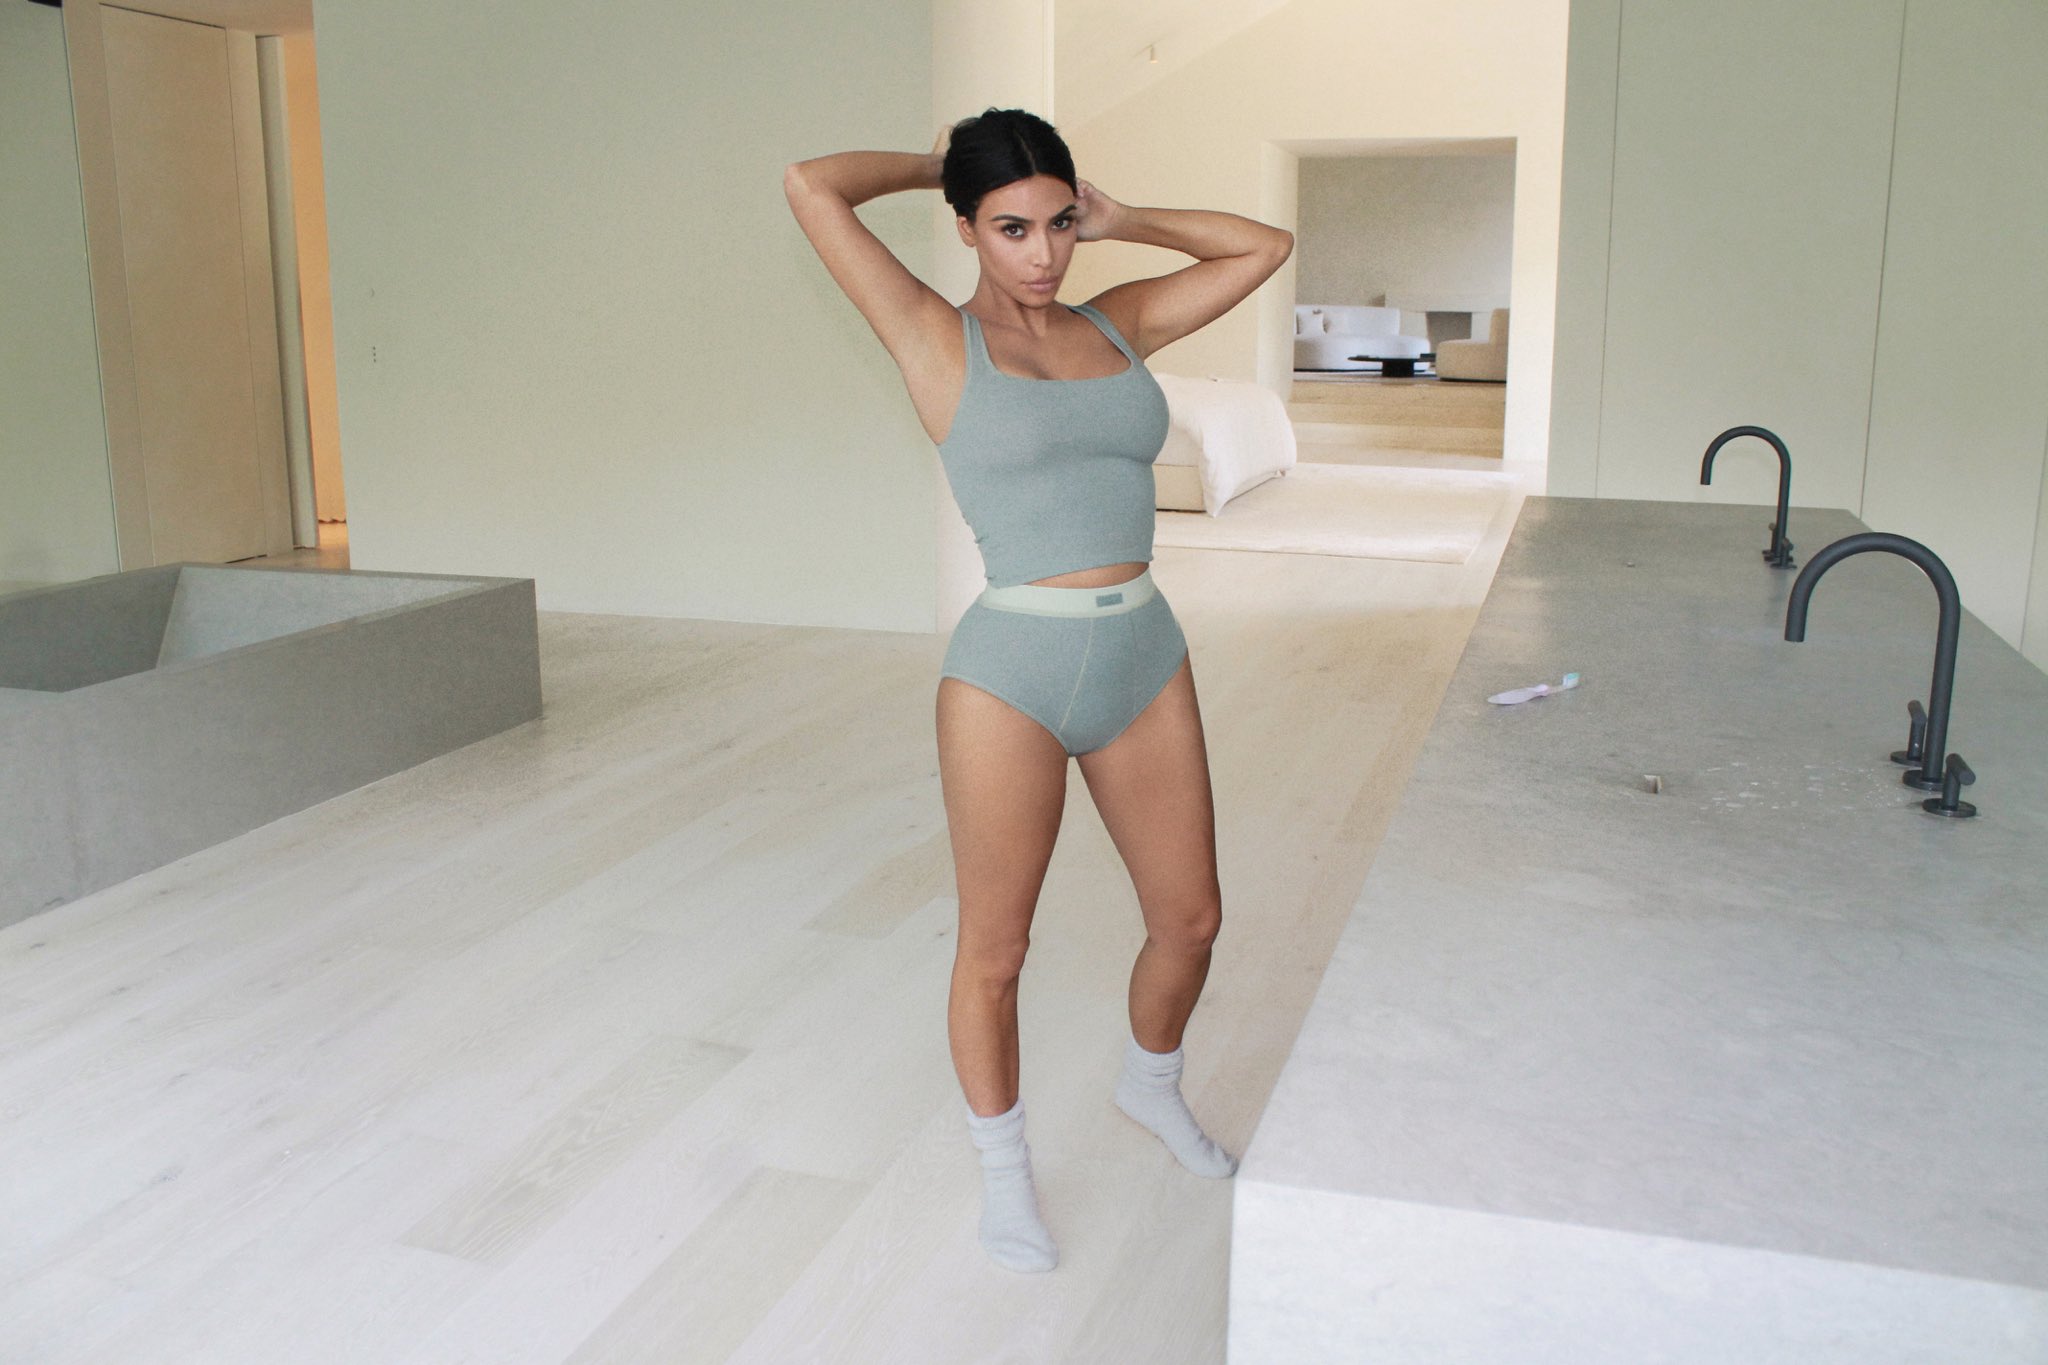 Kim Kardashian on X: I'm wearing the @skims Cotton Rib Tank ($34) and the  Cotton Rib Brief ($28) in Mineral, part of the exclusive Cotton Collection  dropping October 15 at 9AM PST.